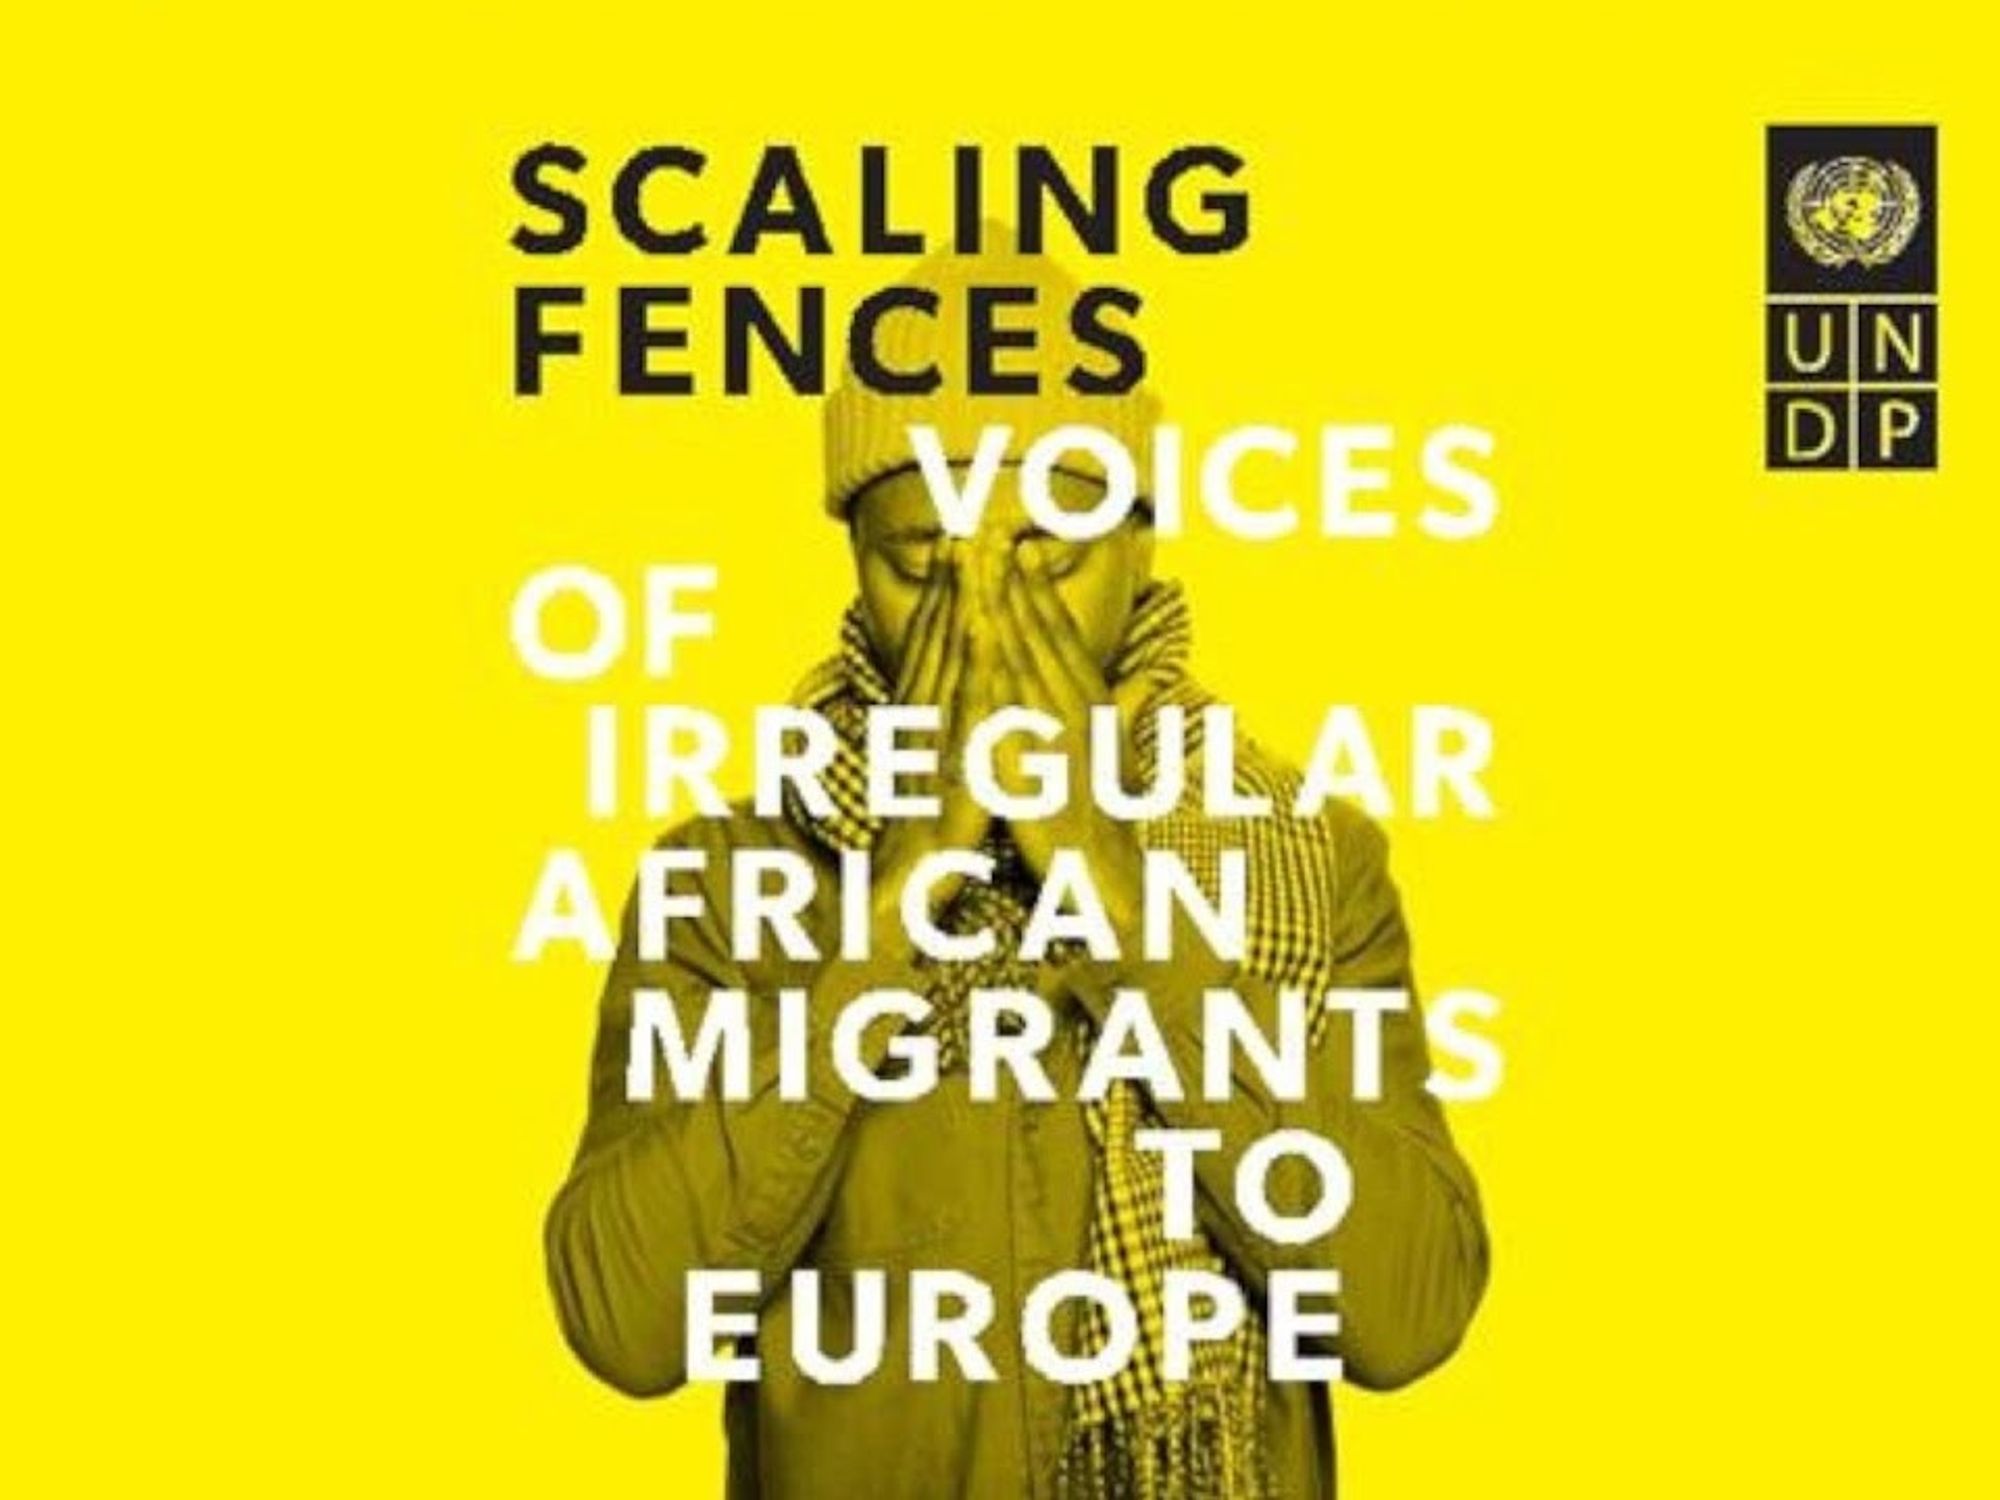 6 Things We Learned About African Migration to Europe in 2019 From a New UN Report